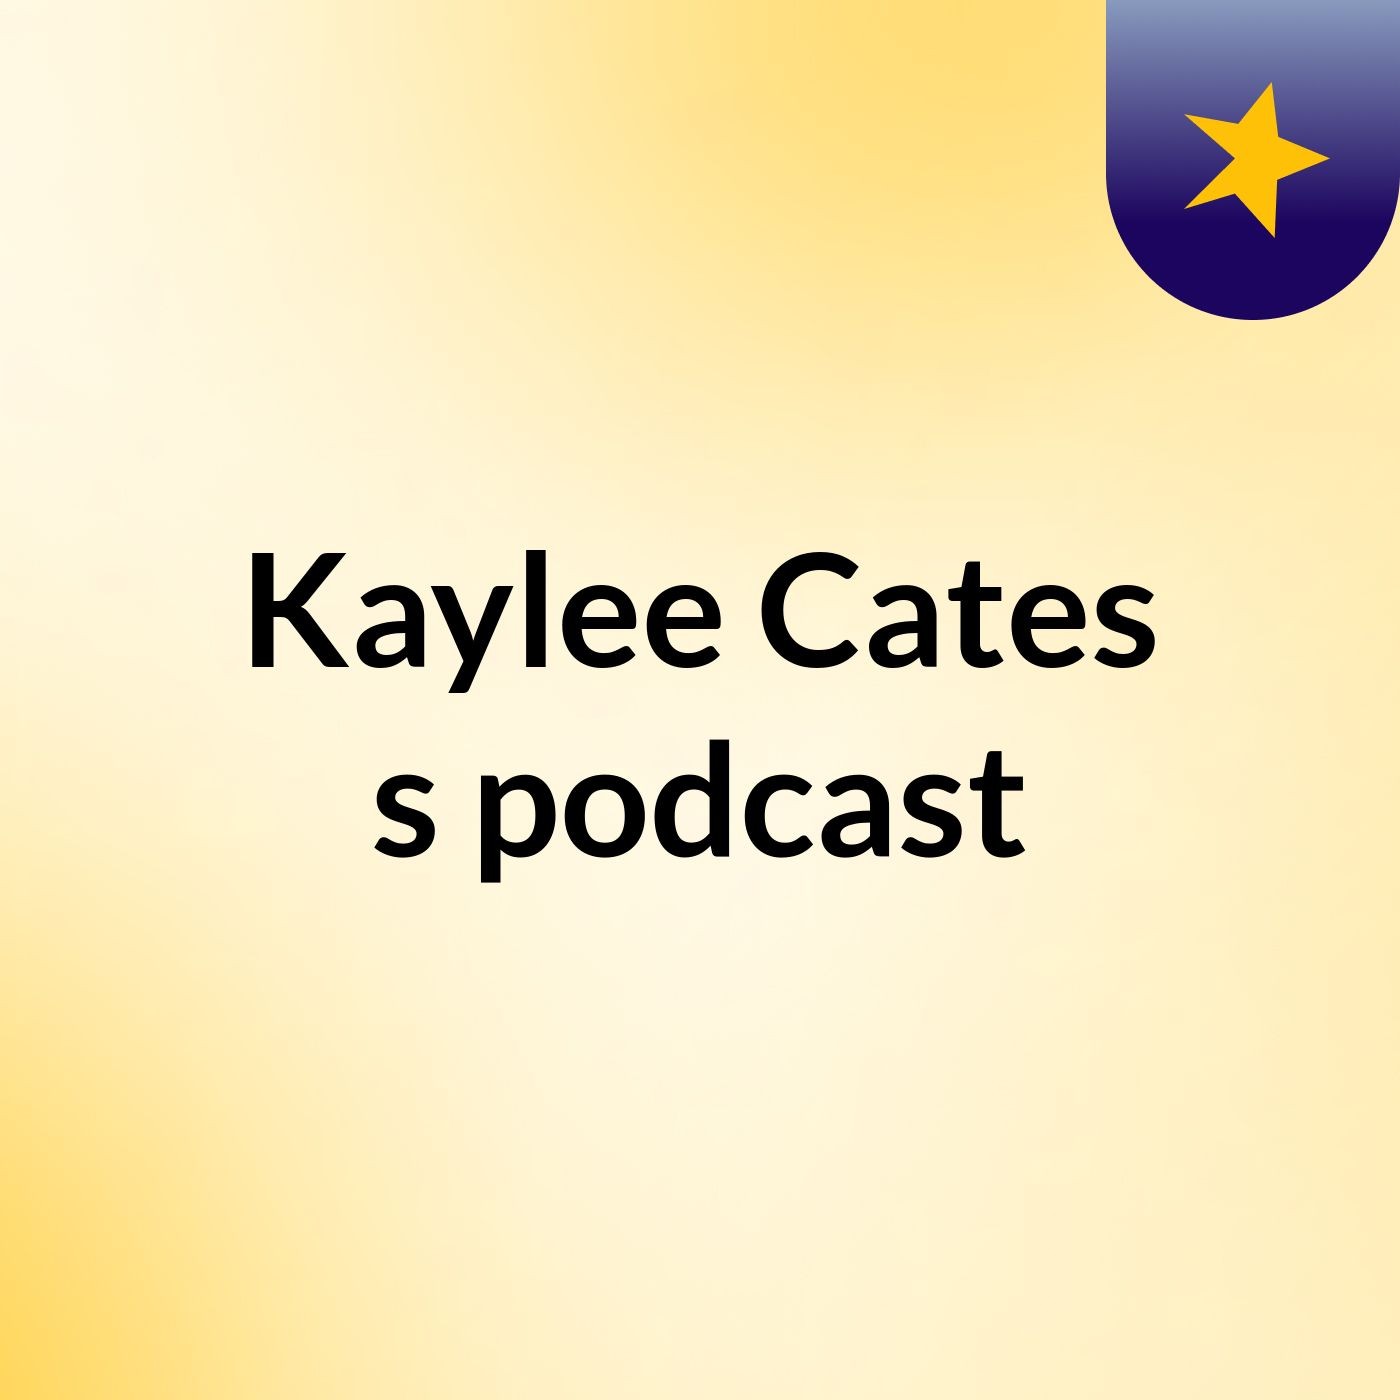 Kaylee Cates's podcast